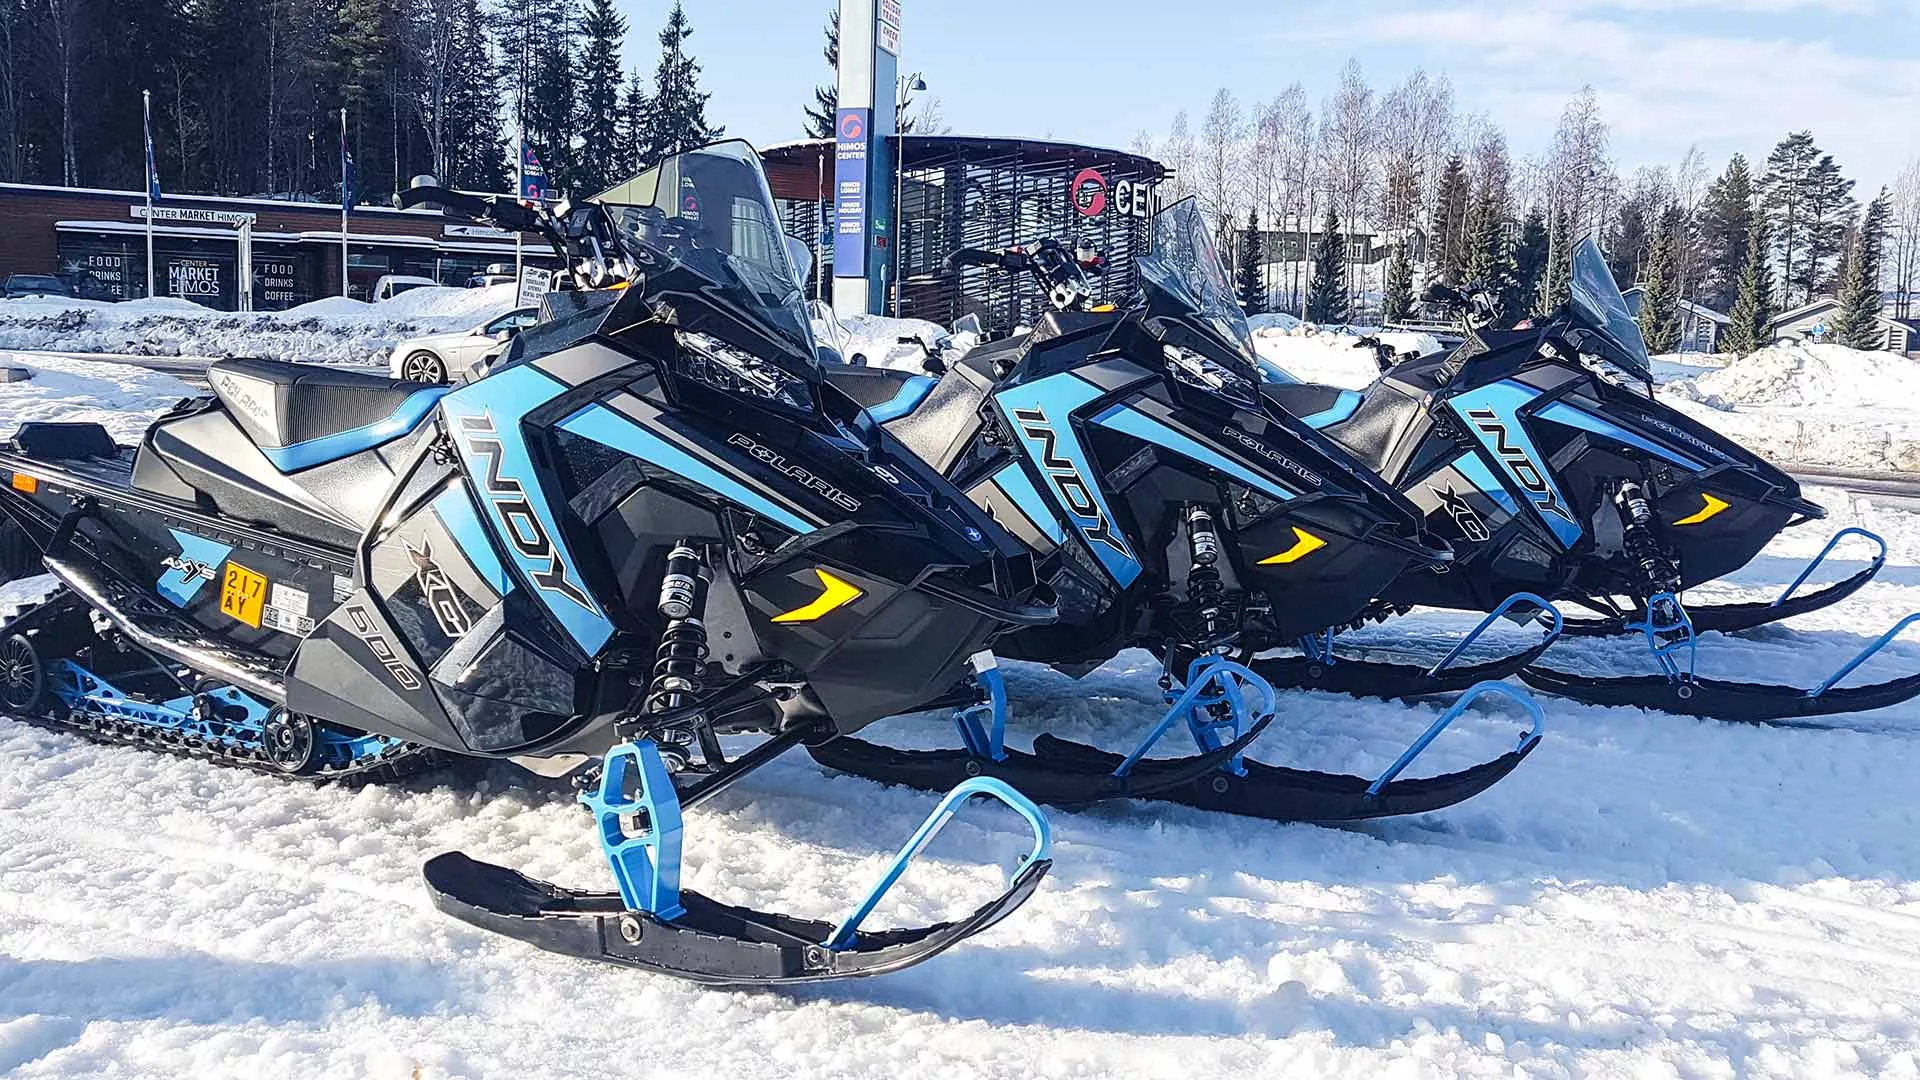 Rent Snowmobile Sinaia in Romania, Europe | Snowmobiling - Rated 0.9